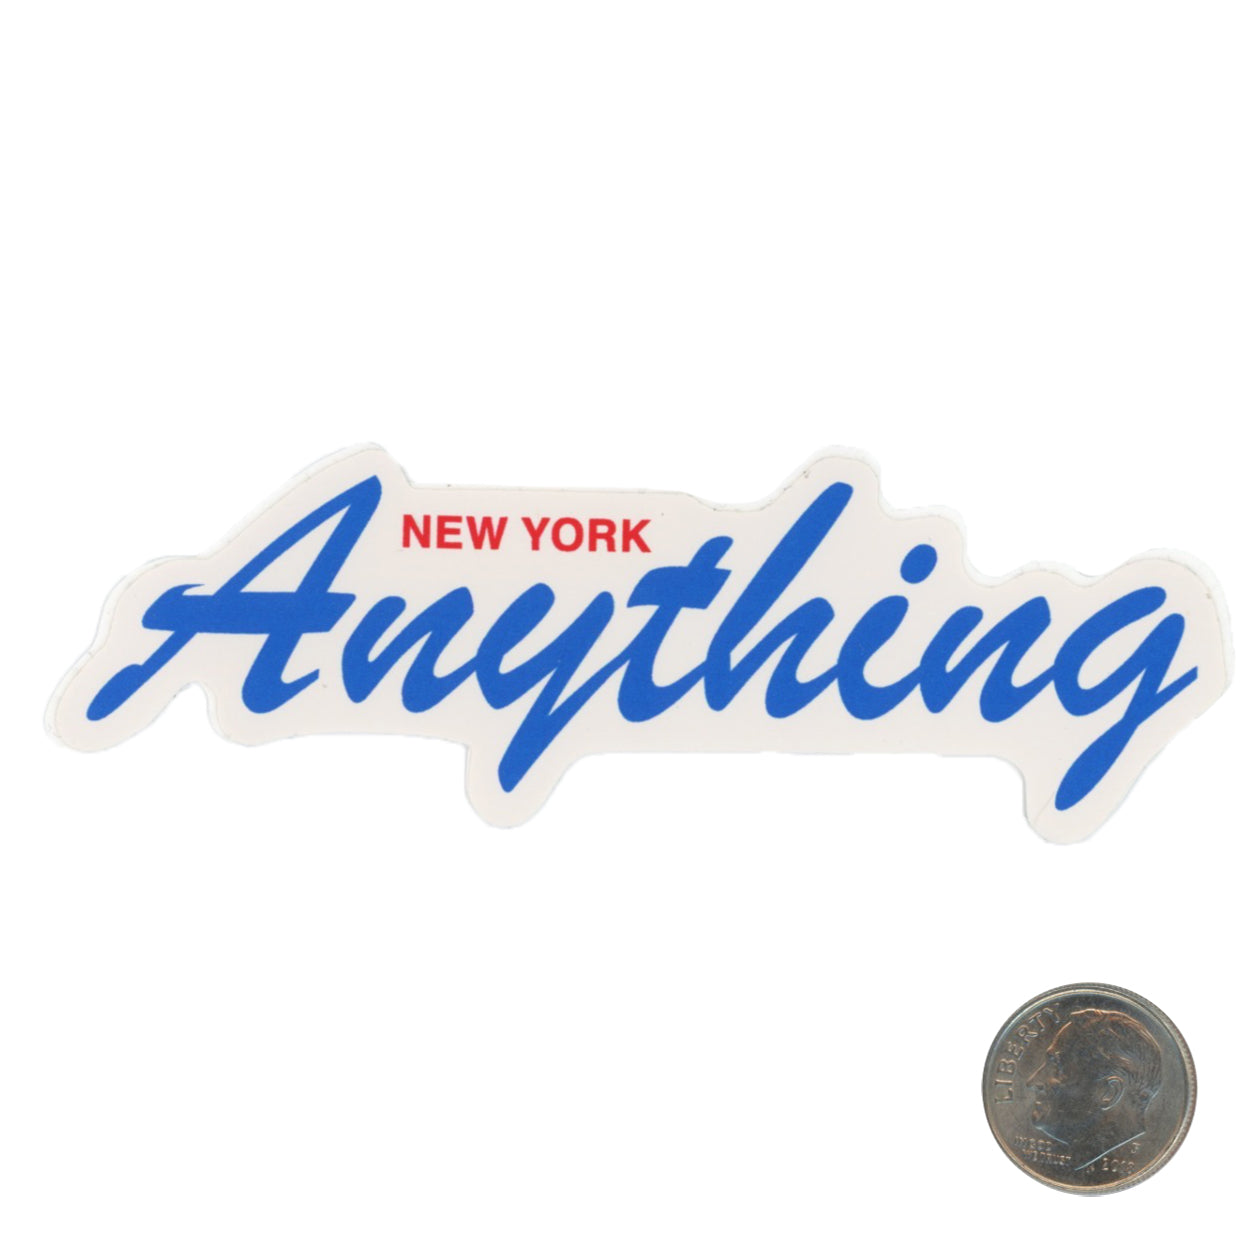 Anything New York Script Logo Blue Sticker with dime